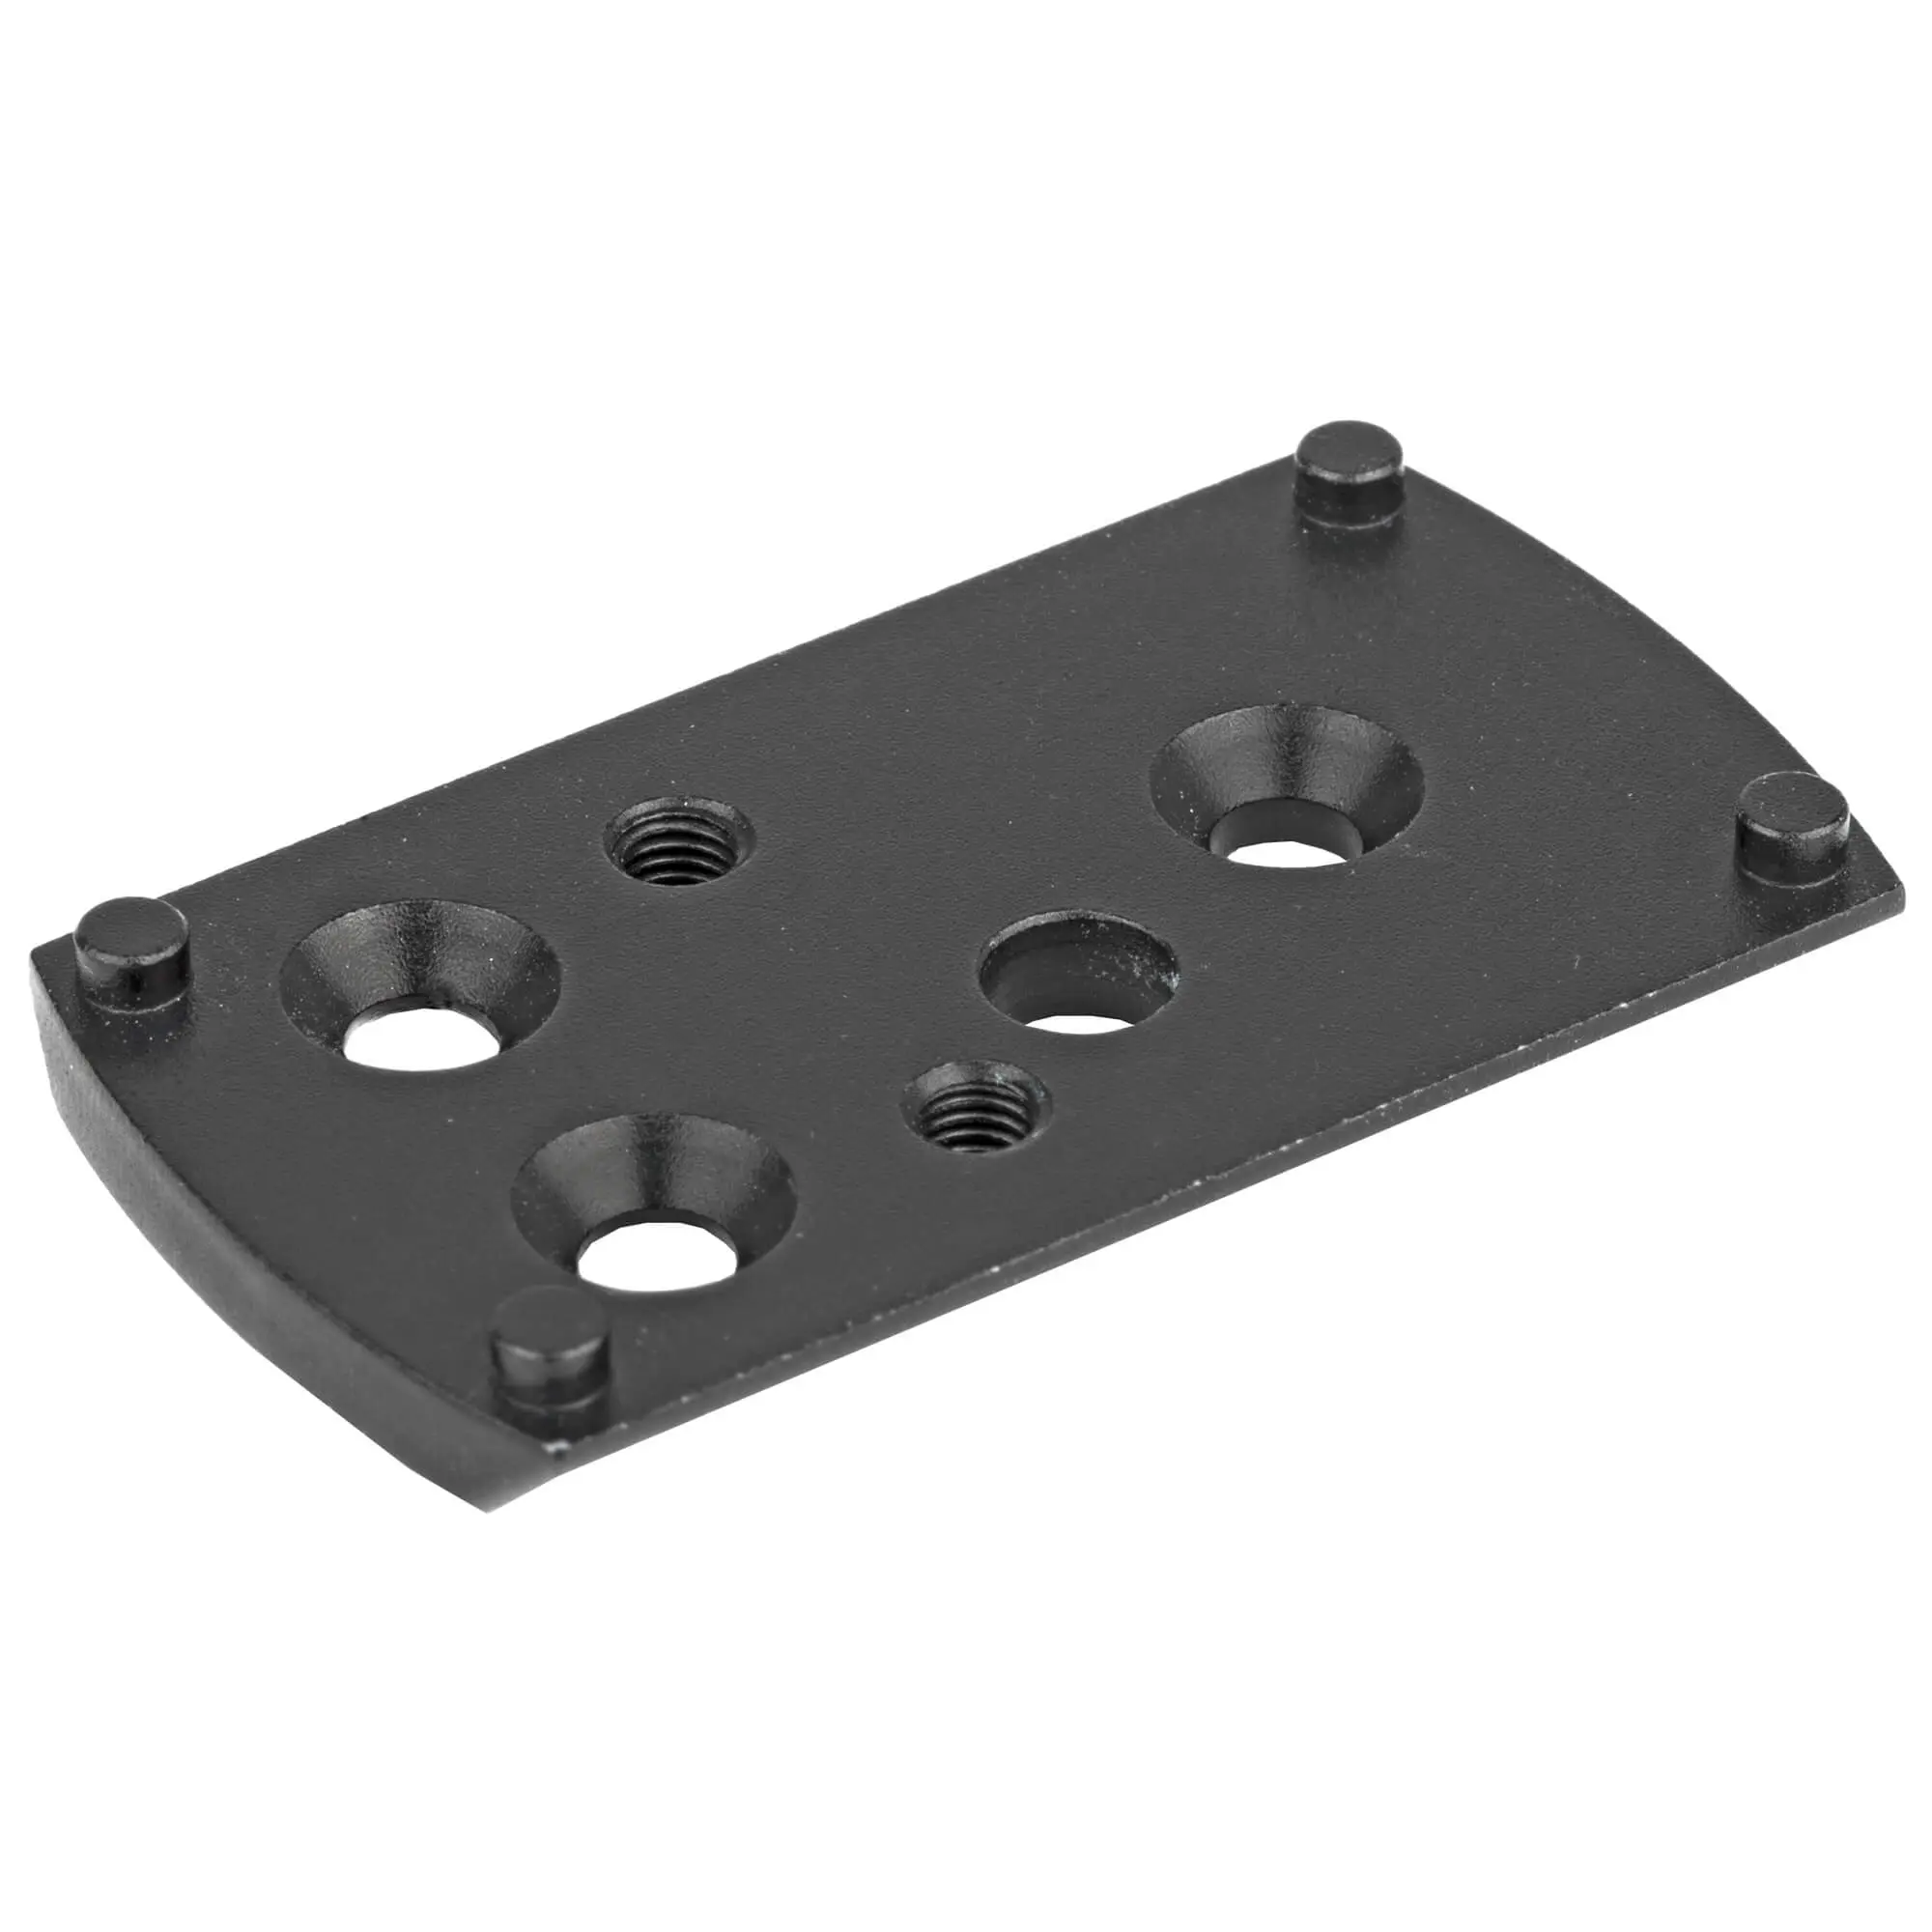 Burris Fastfire Mount for All Glock and Beretta PX4 Storm Pistols - Compatible with AT3 ARO Red Dot Sight - AT3 Tactical